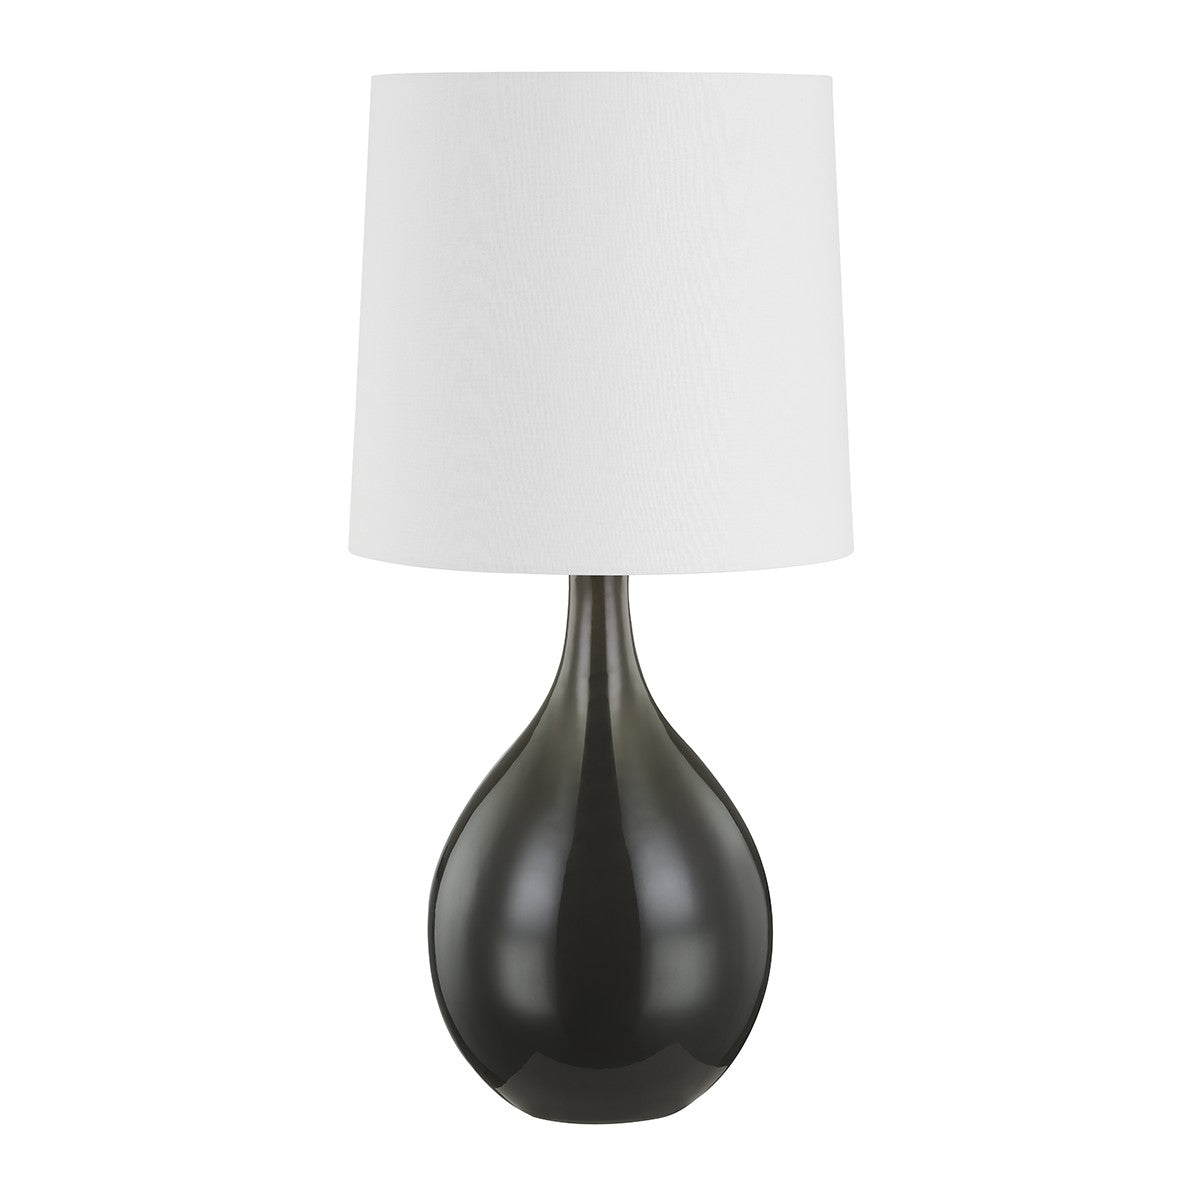 Hudson Valley - L2016-AGB/CGM - One Light Table Lamp - Durban - Aged Brass